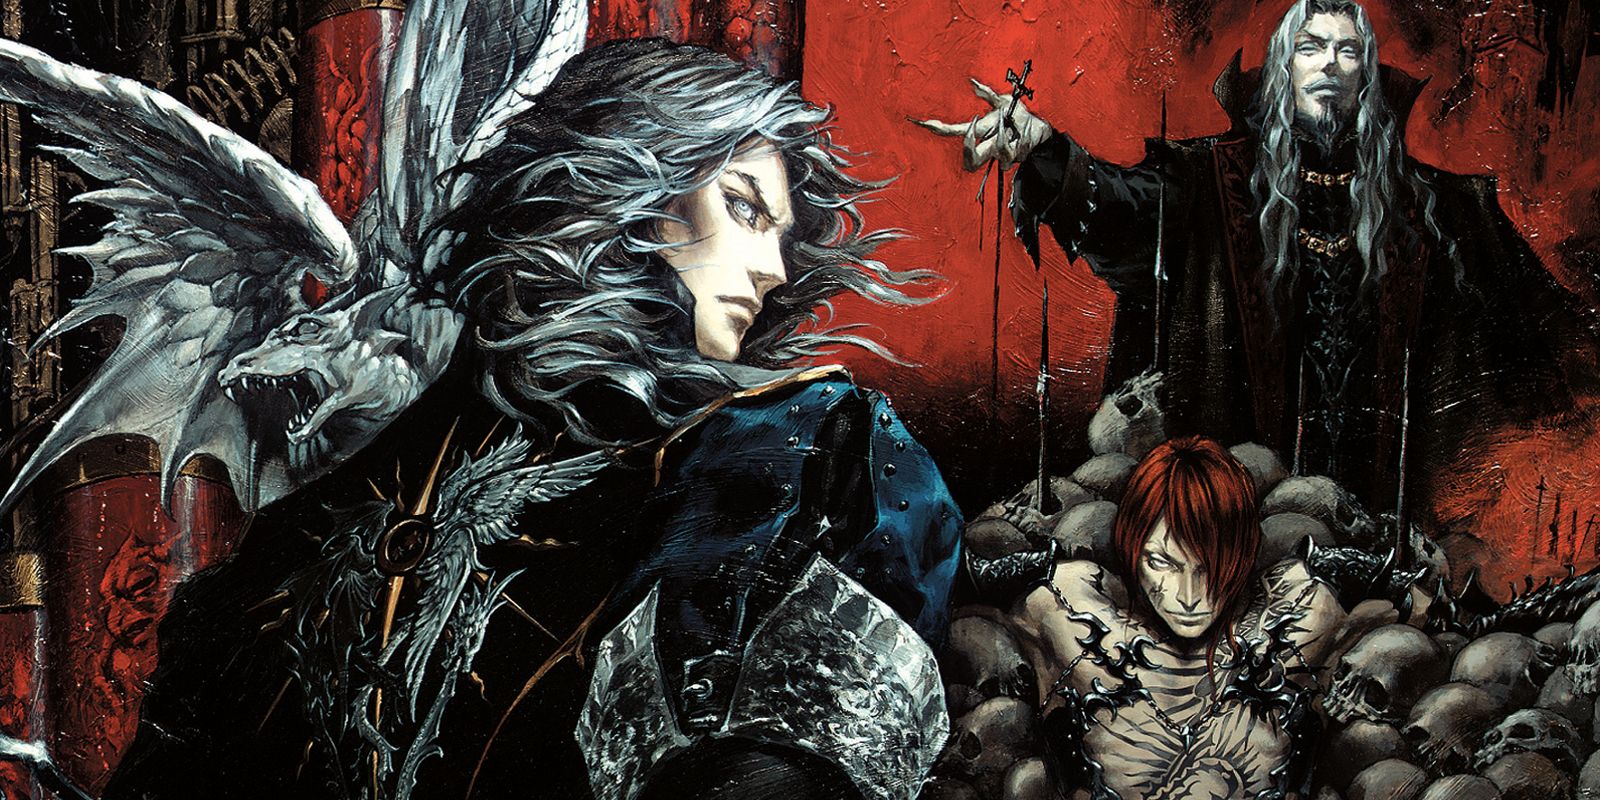 An image of art from Castlevania Curse of Darkness